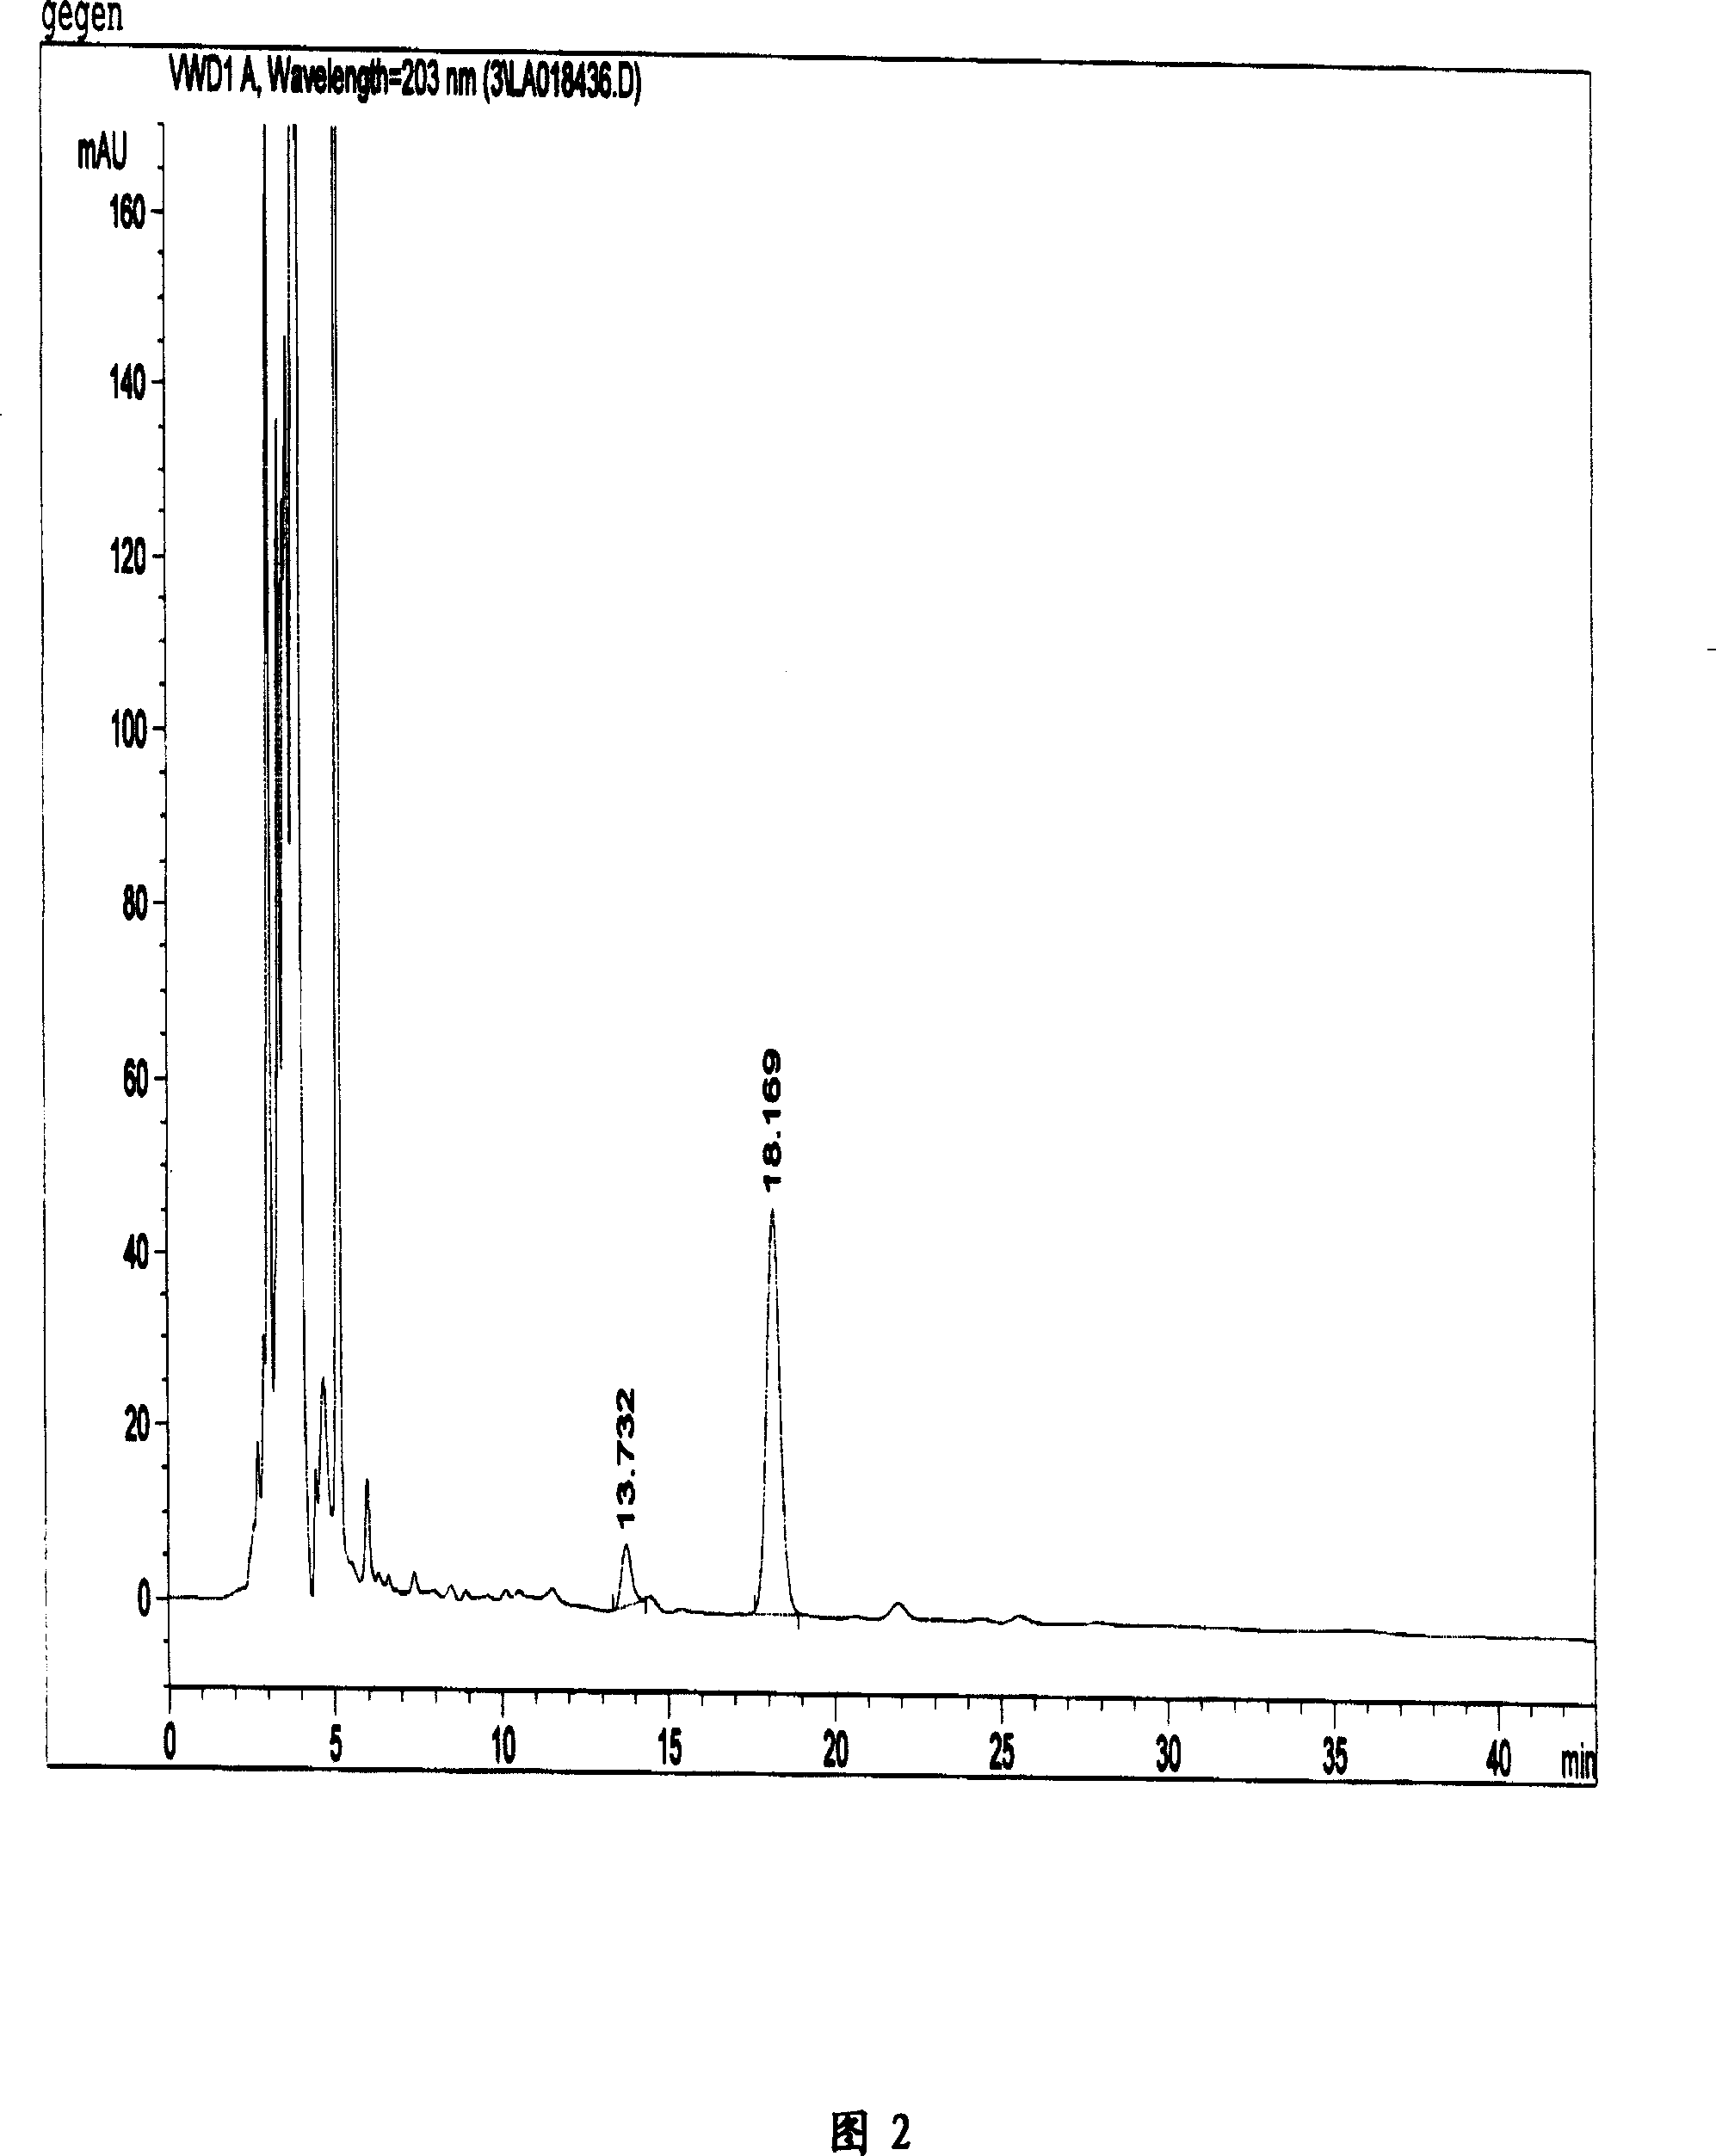 A preparation method of debittered and discolored siraitia grosvenorii extracts